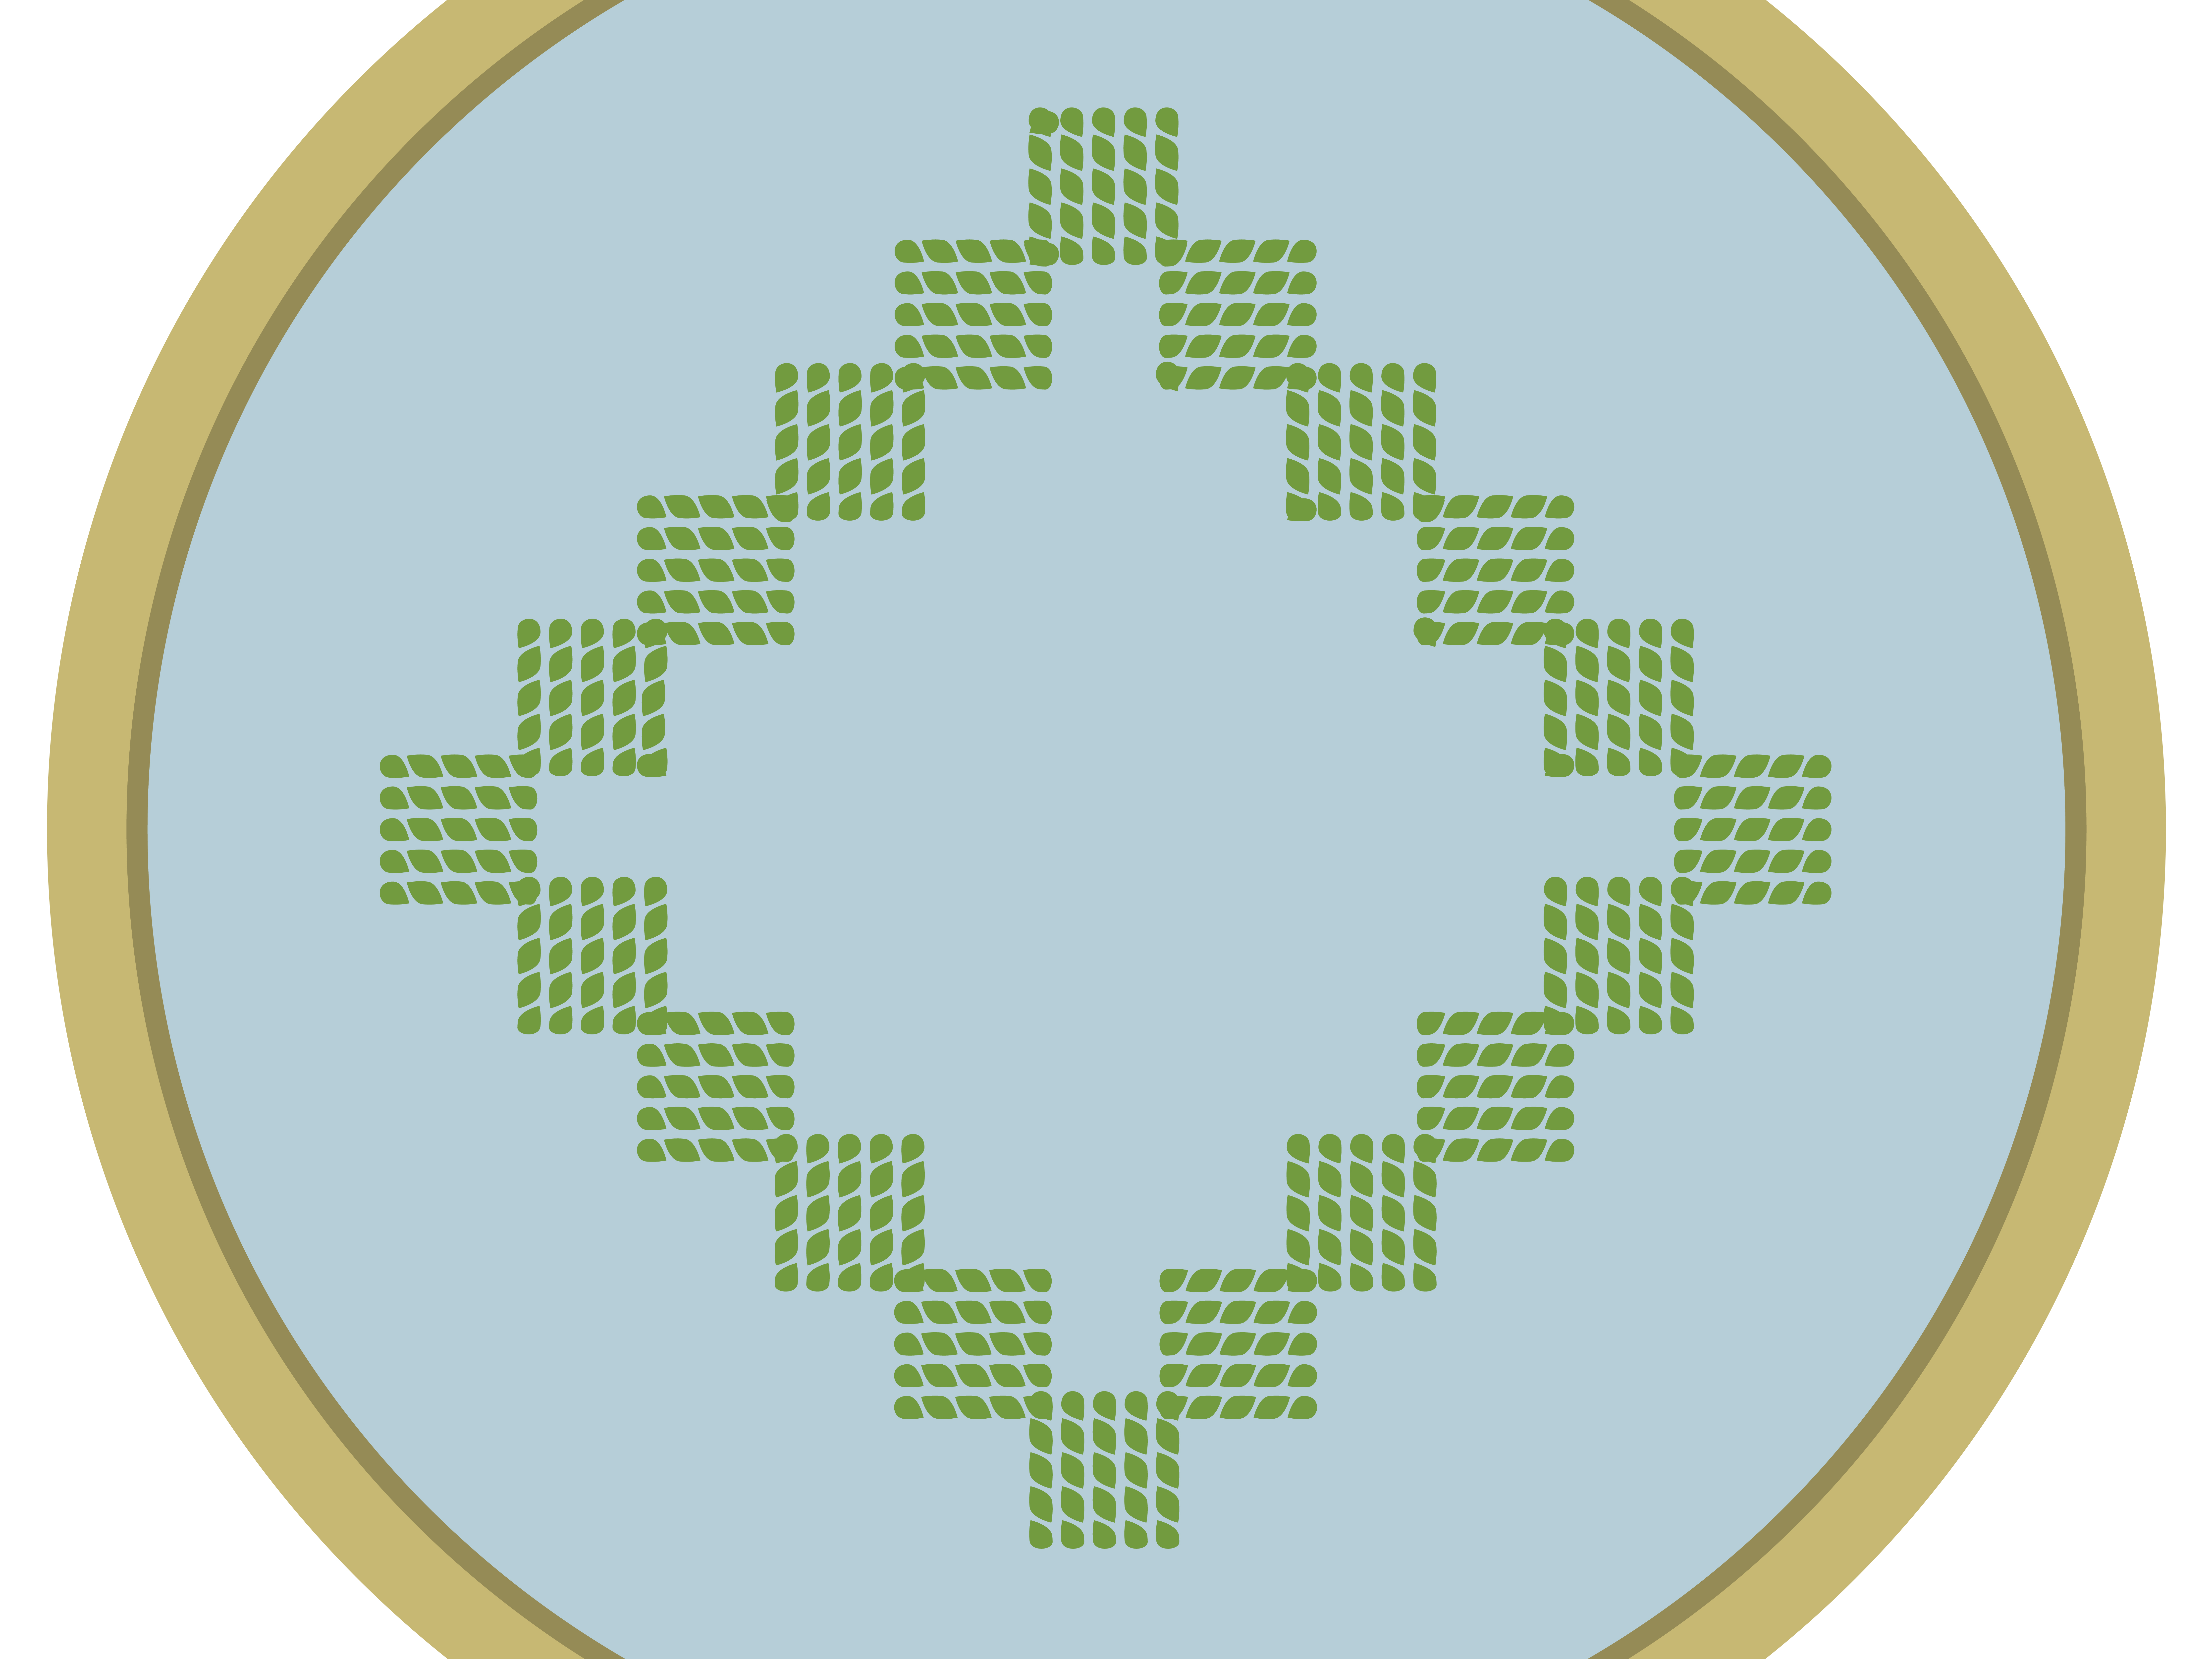 Hardanger Embroidery Patterns How To Embroider The Kloster Stitch Hardanger 10 Steps